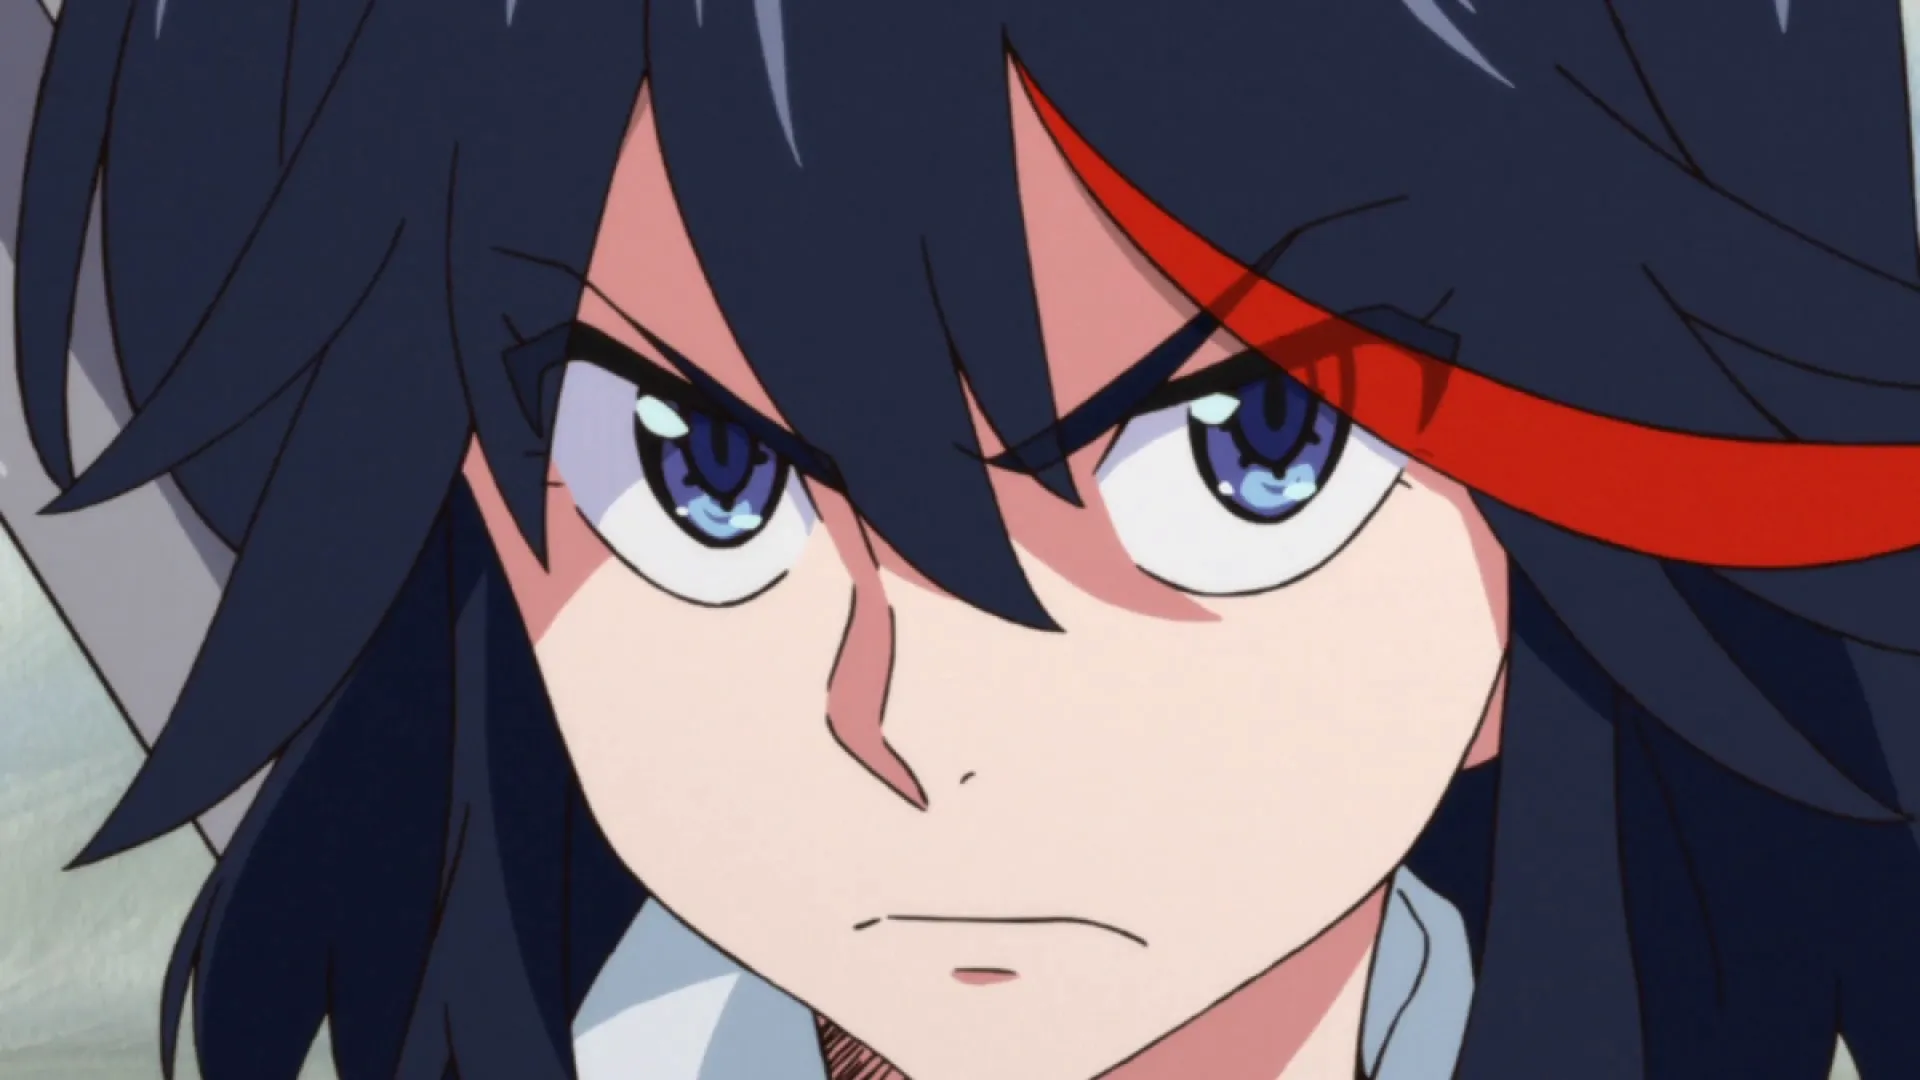 Ryuko looking like she's had it up to here with your bs